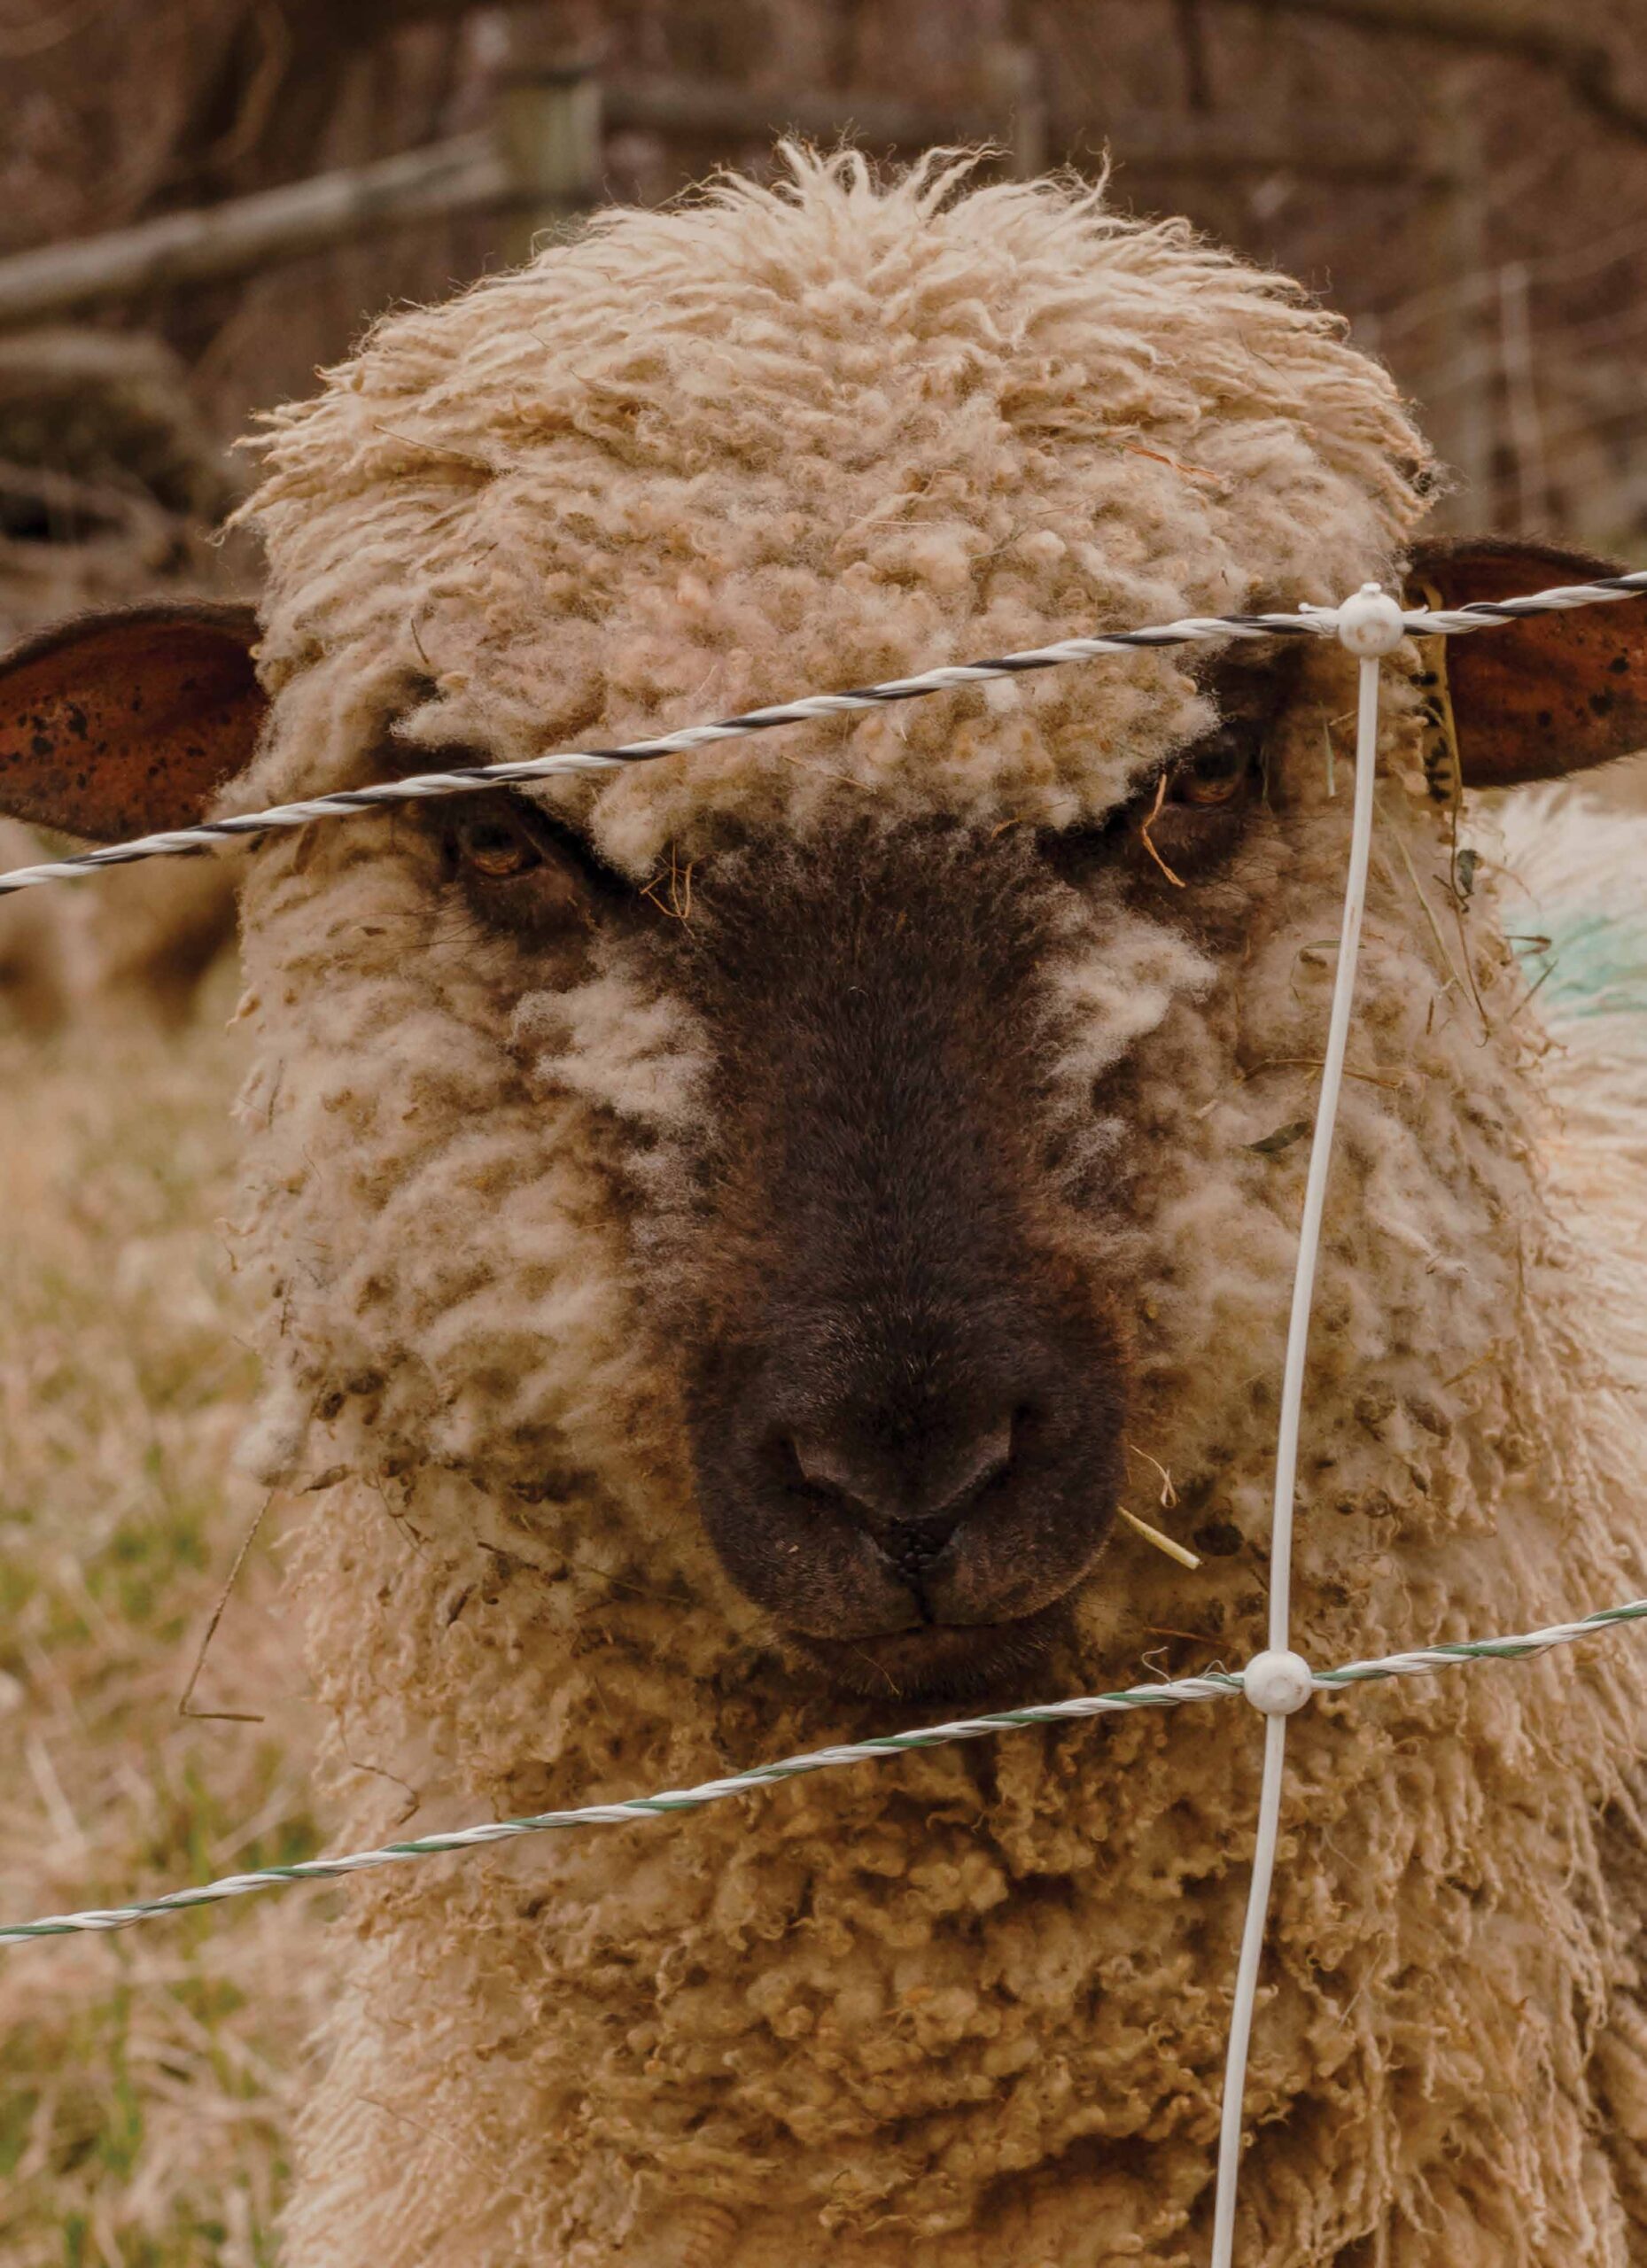 Photo of the close of up of a sheep.